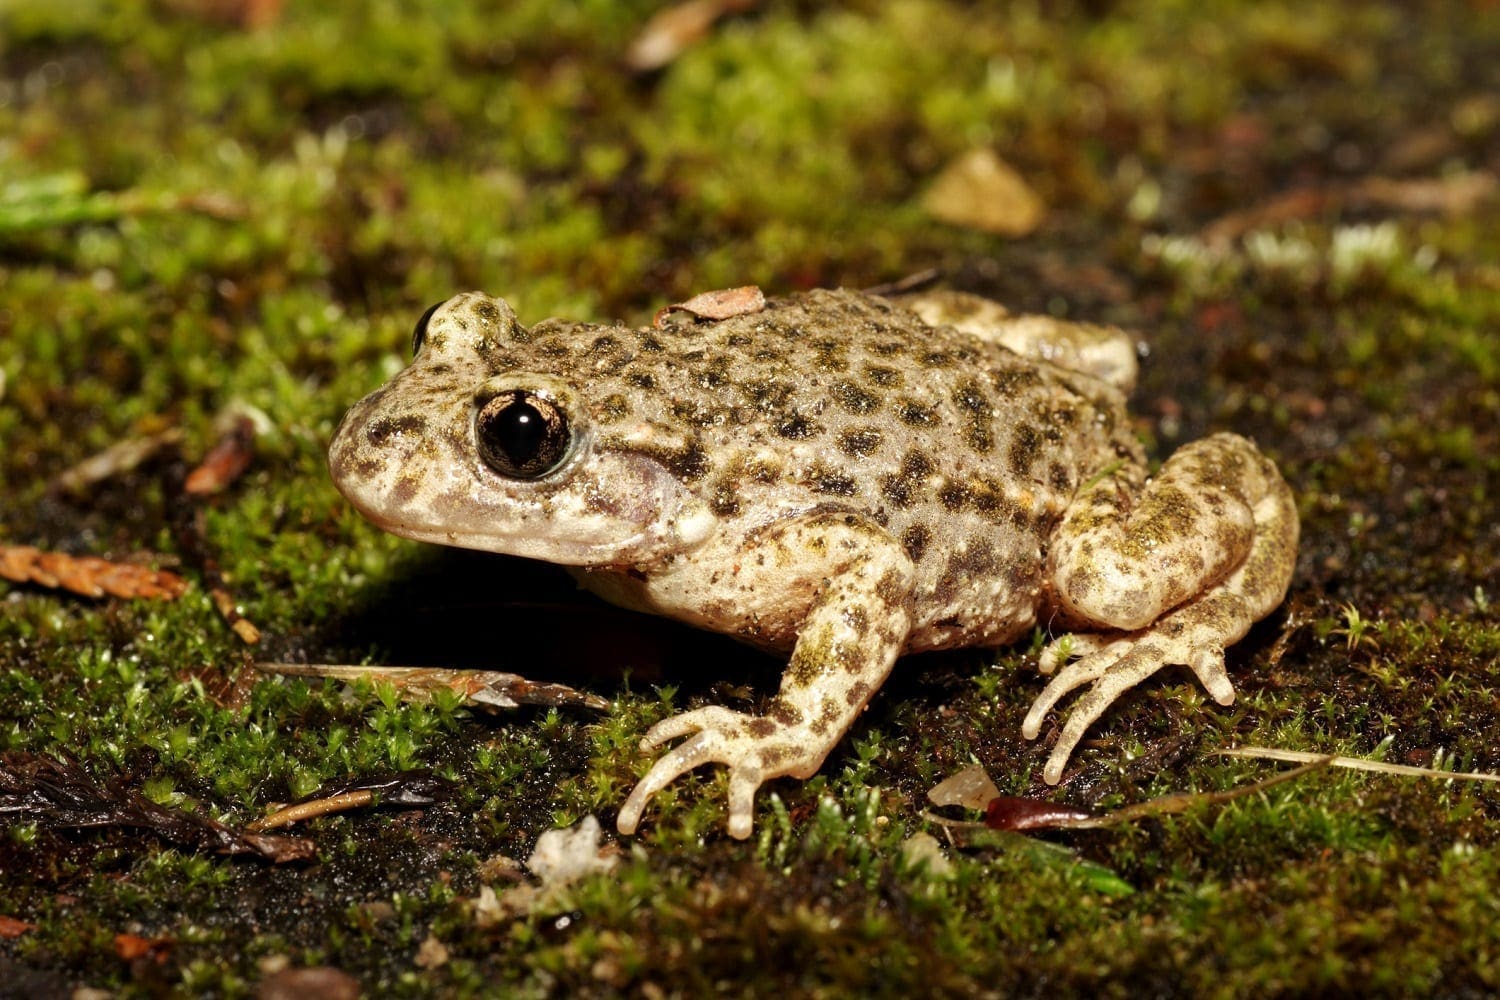 Midwife Toad on mossy ground: ID 44681190 © Wildlifesnapper | Dreamstime.com